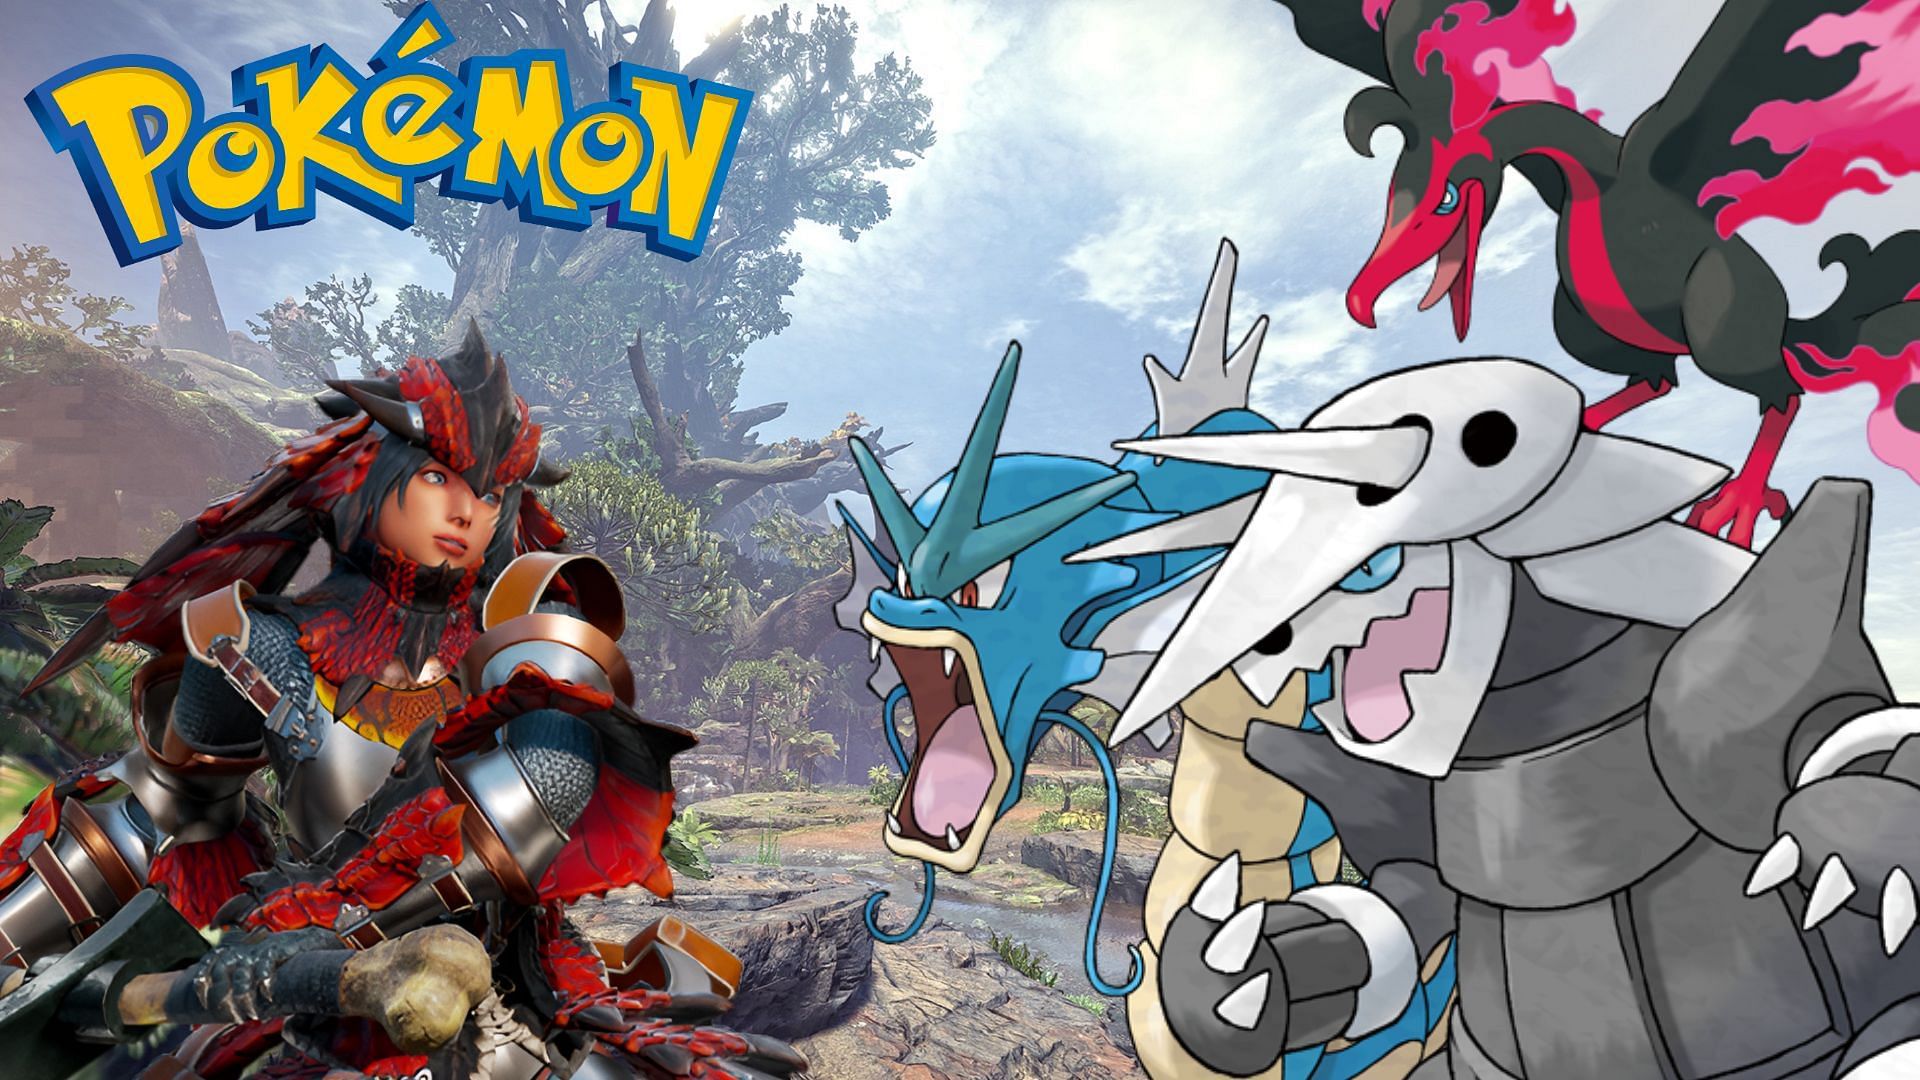 Gyarados, Aggron, and Galarian Moltres face off against a Monster Hunter near the Pokemon logo.